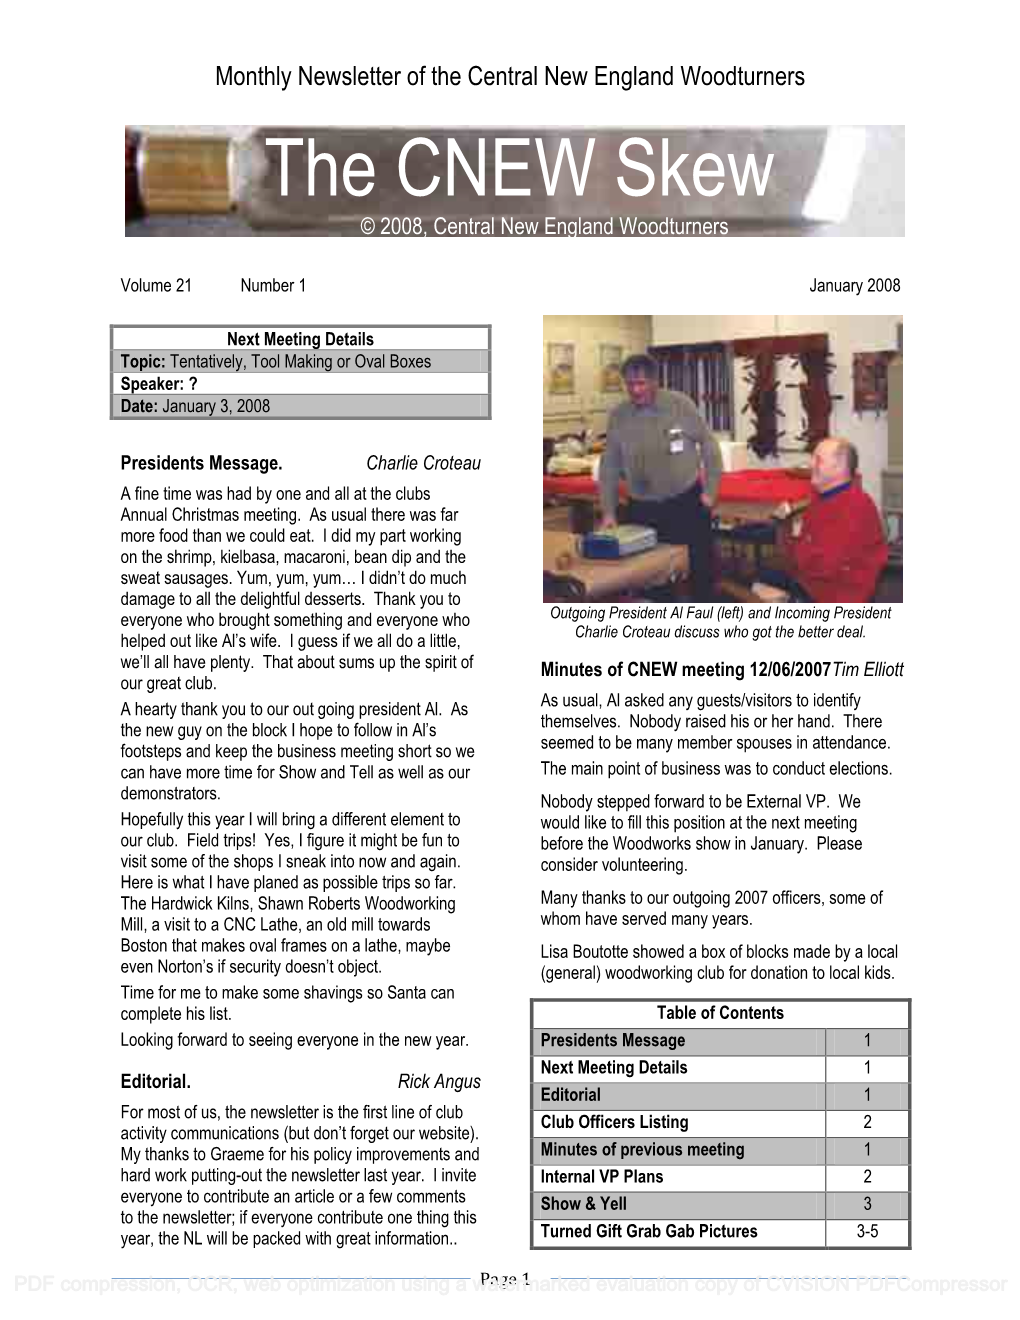 The CNEW Skew © 2008, Central New England Woodturners